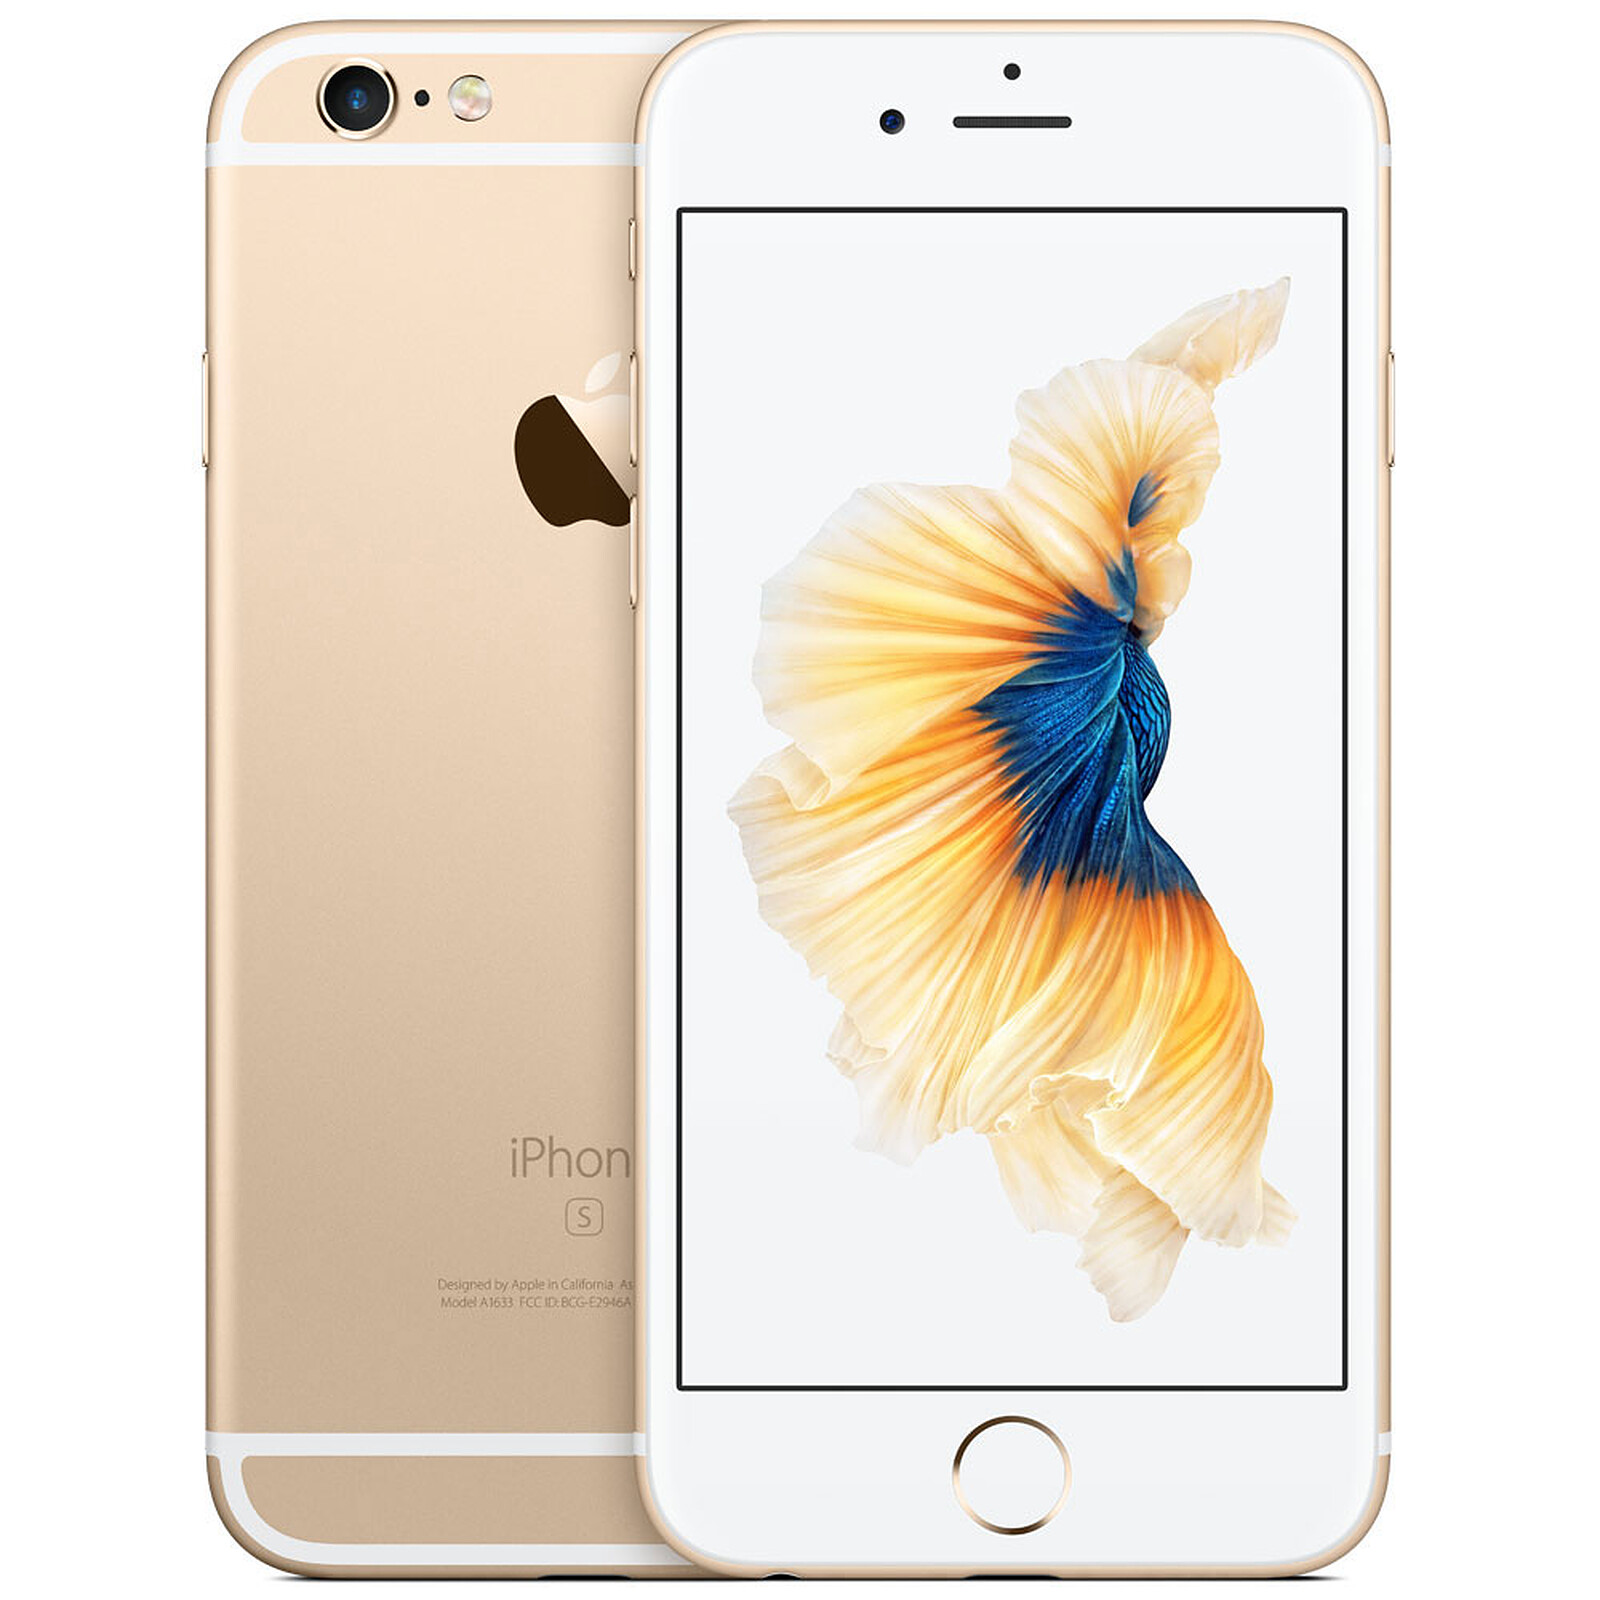 kromme machine tijdschrift Apple iPhone 6s 128GB Gold - Mobile phone & smartphone Apple on LDLC